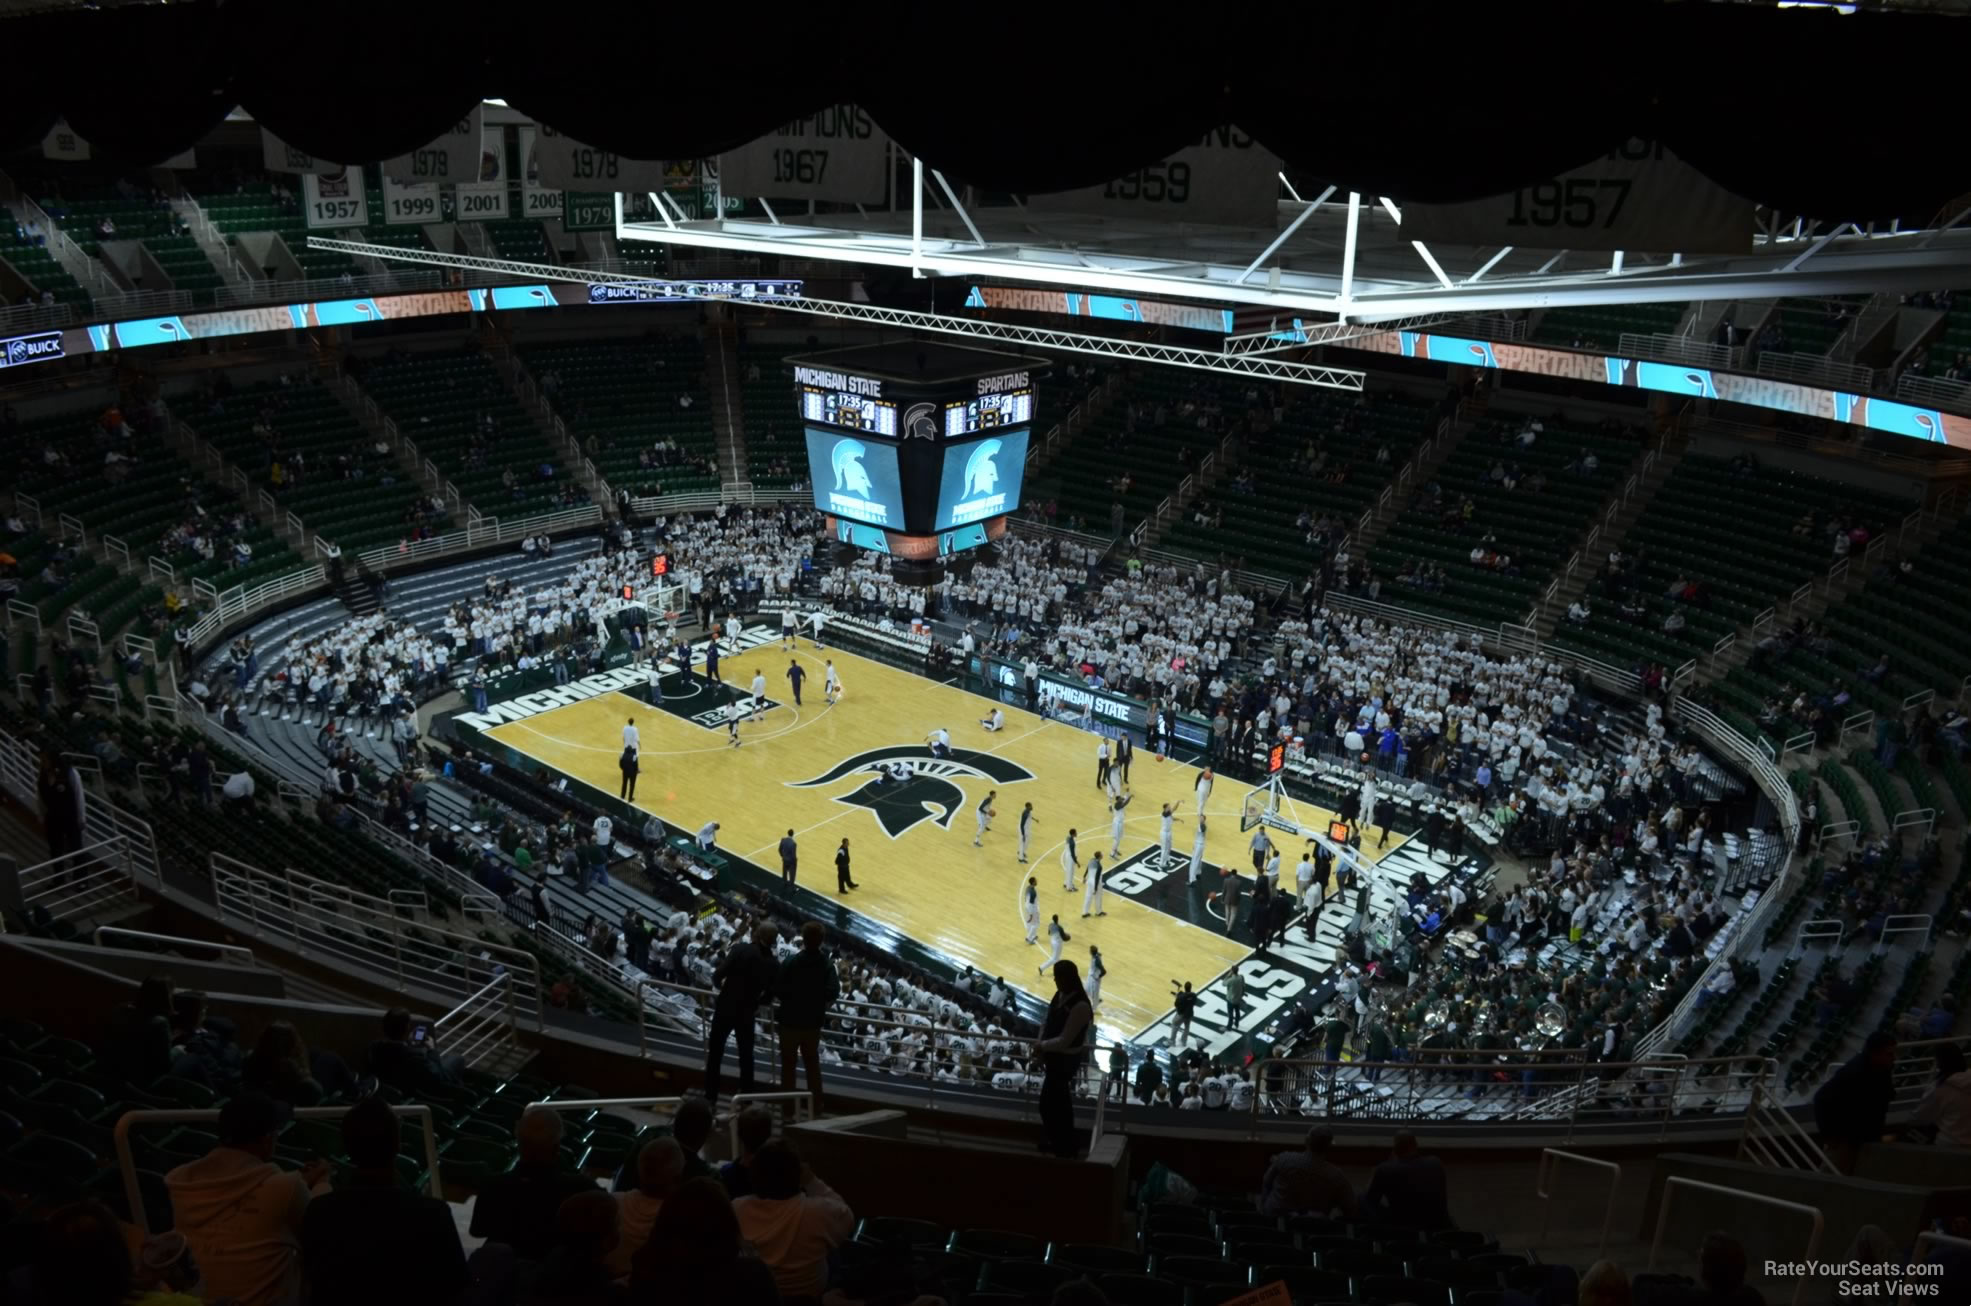 section 223, row 15 seat view  - breslin center